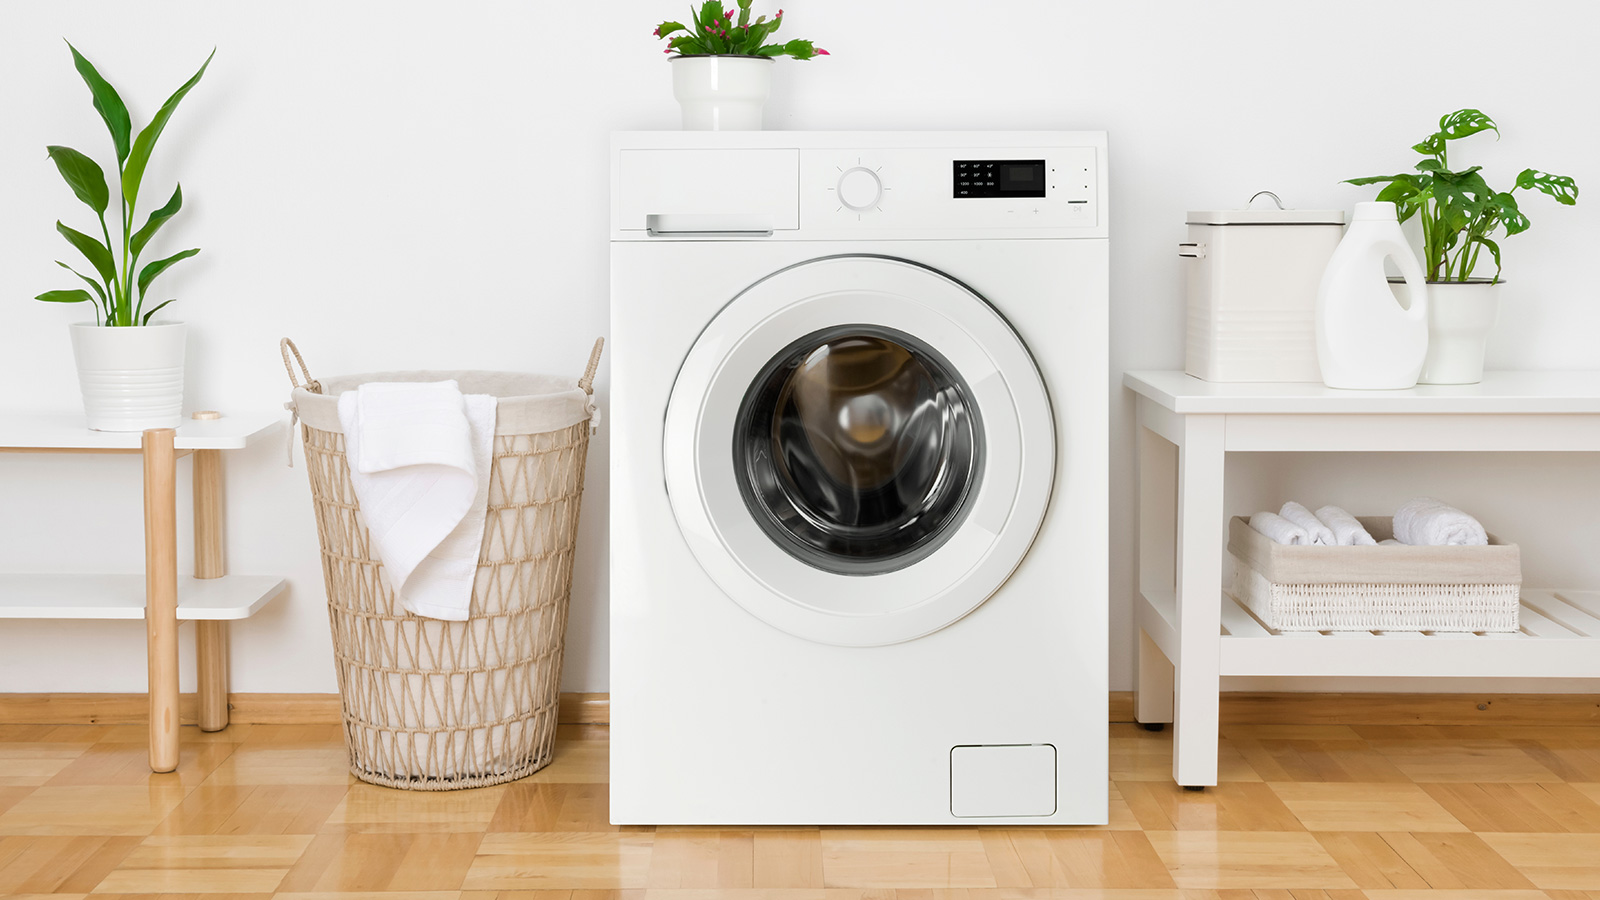 What You Need to Do to Prepare for a New Washing Machine